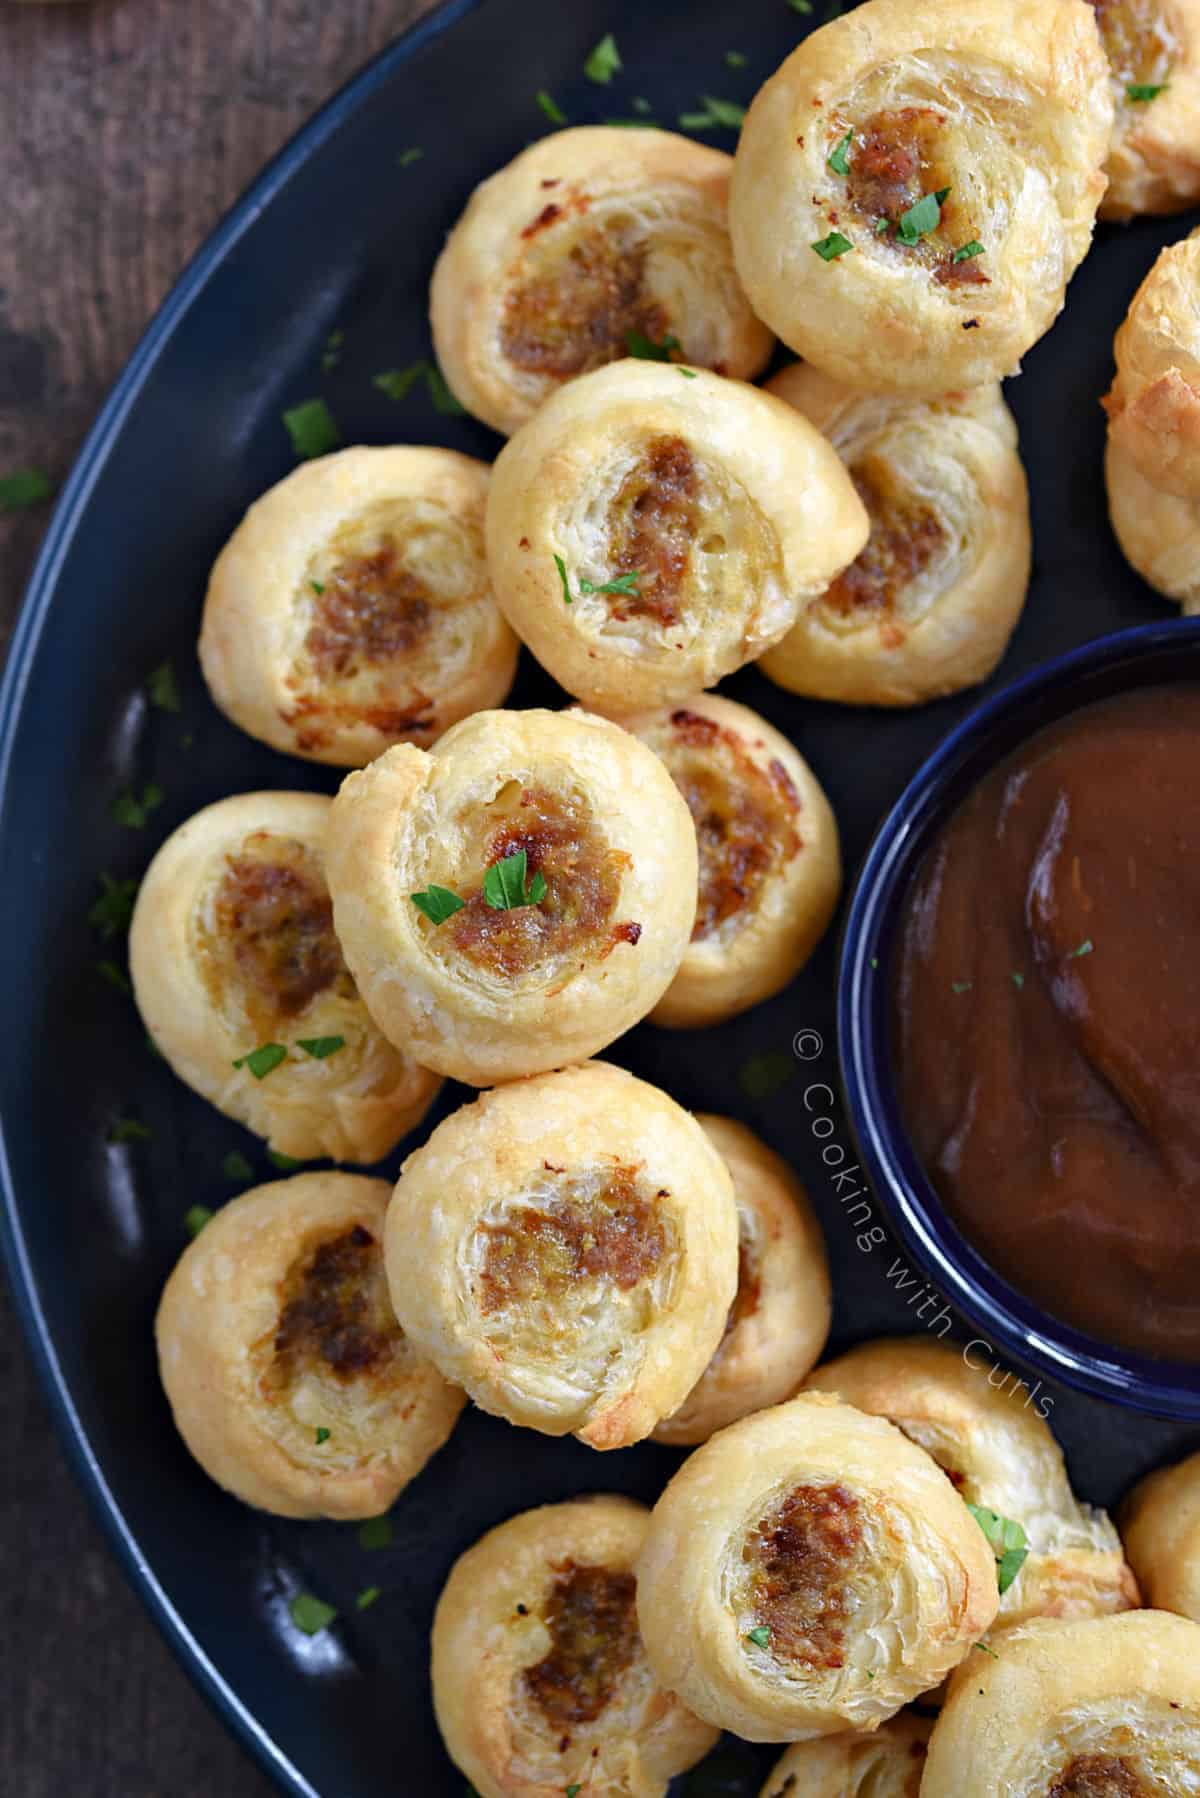 Looking down on a stack of puff pastry sausage bites on a large plate with a bowl of dipping sauce in the center.